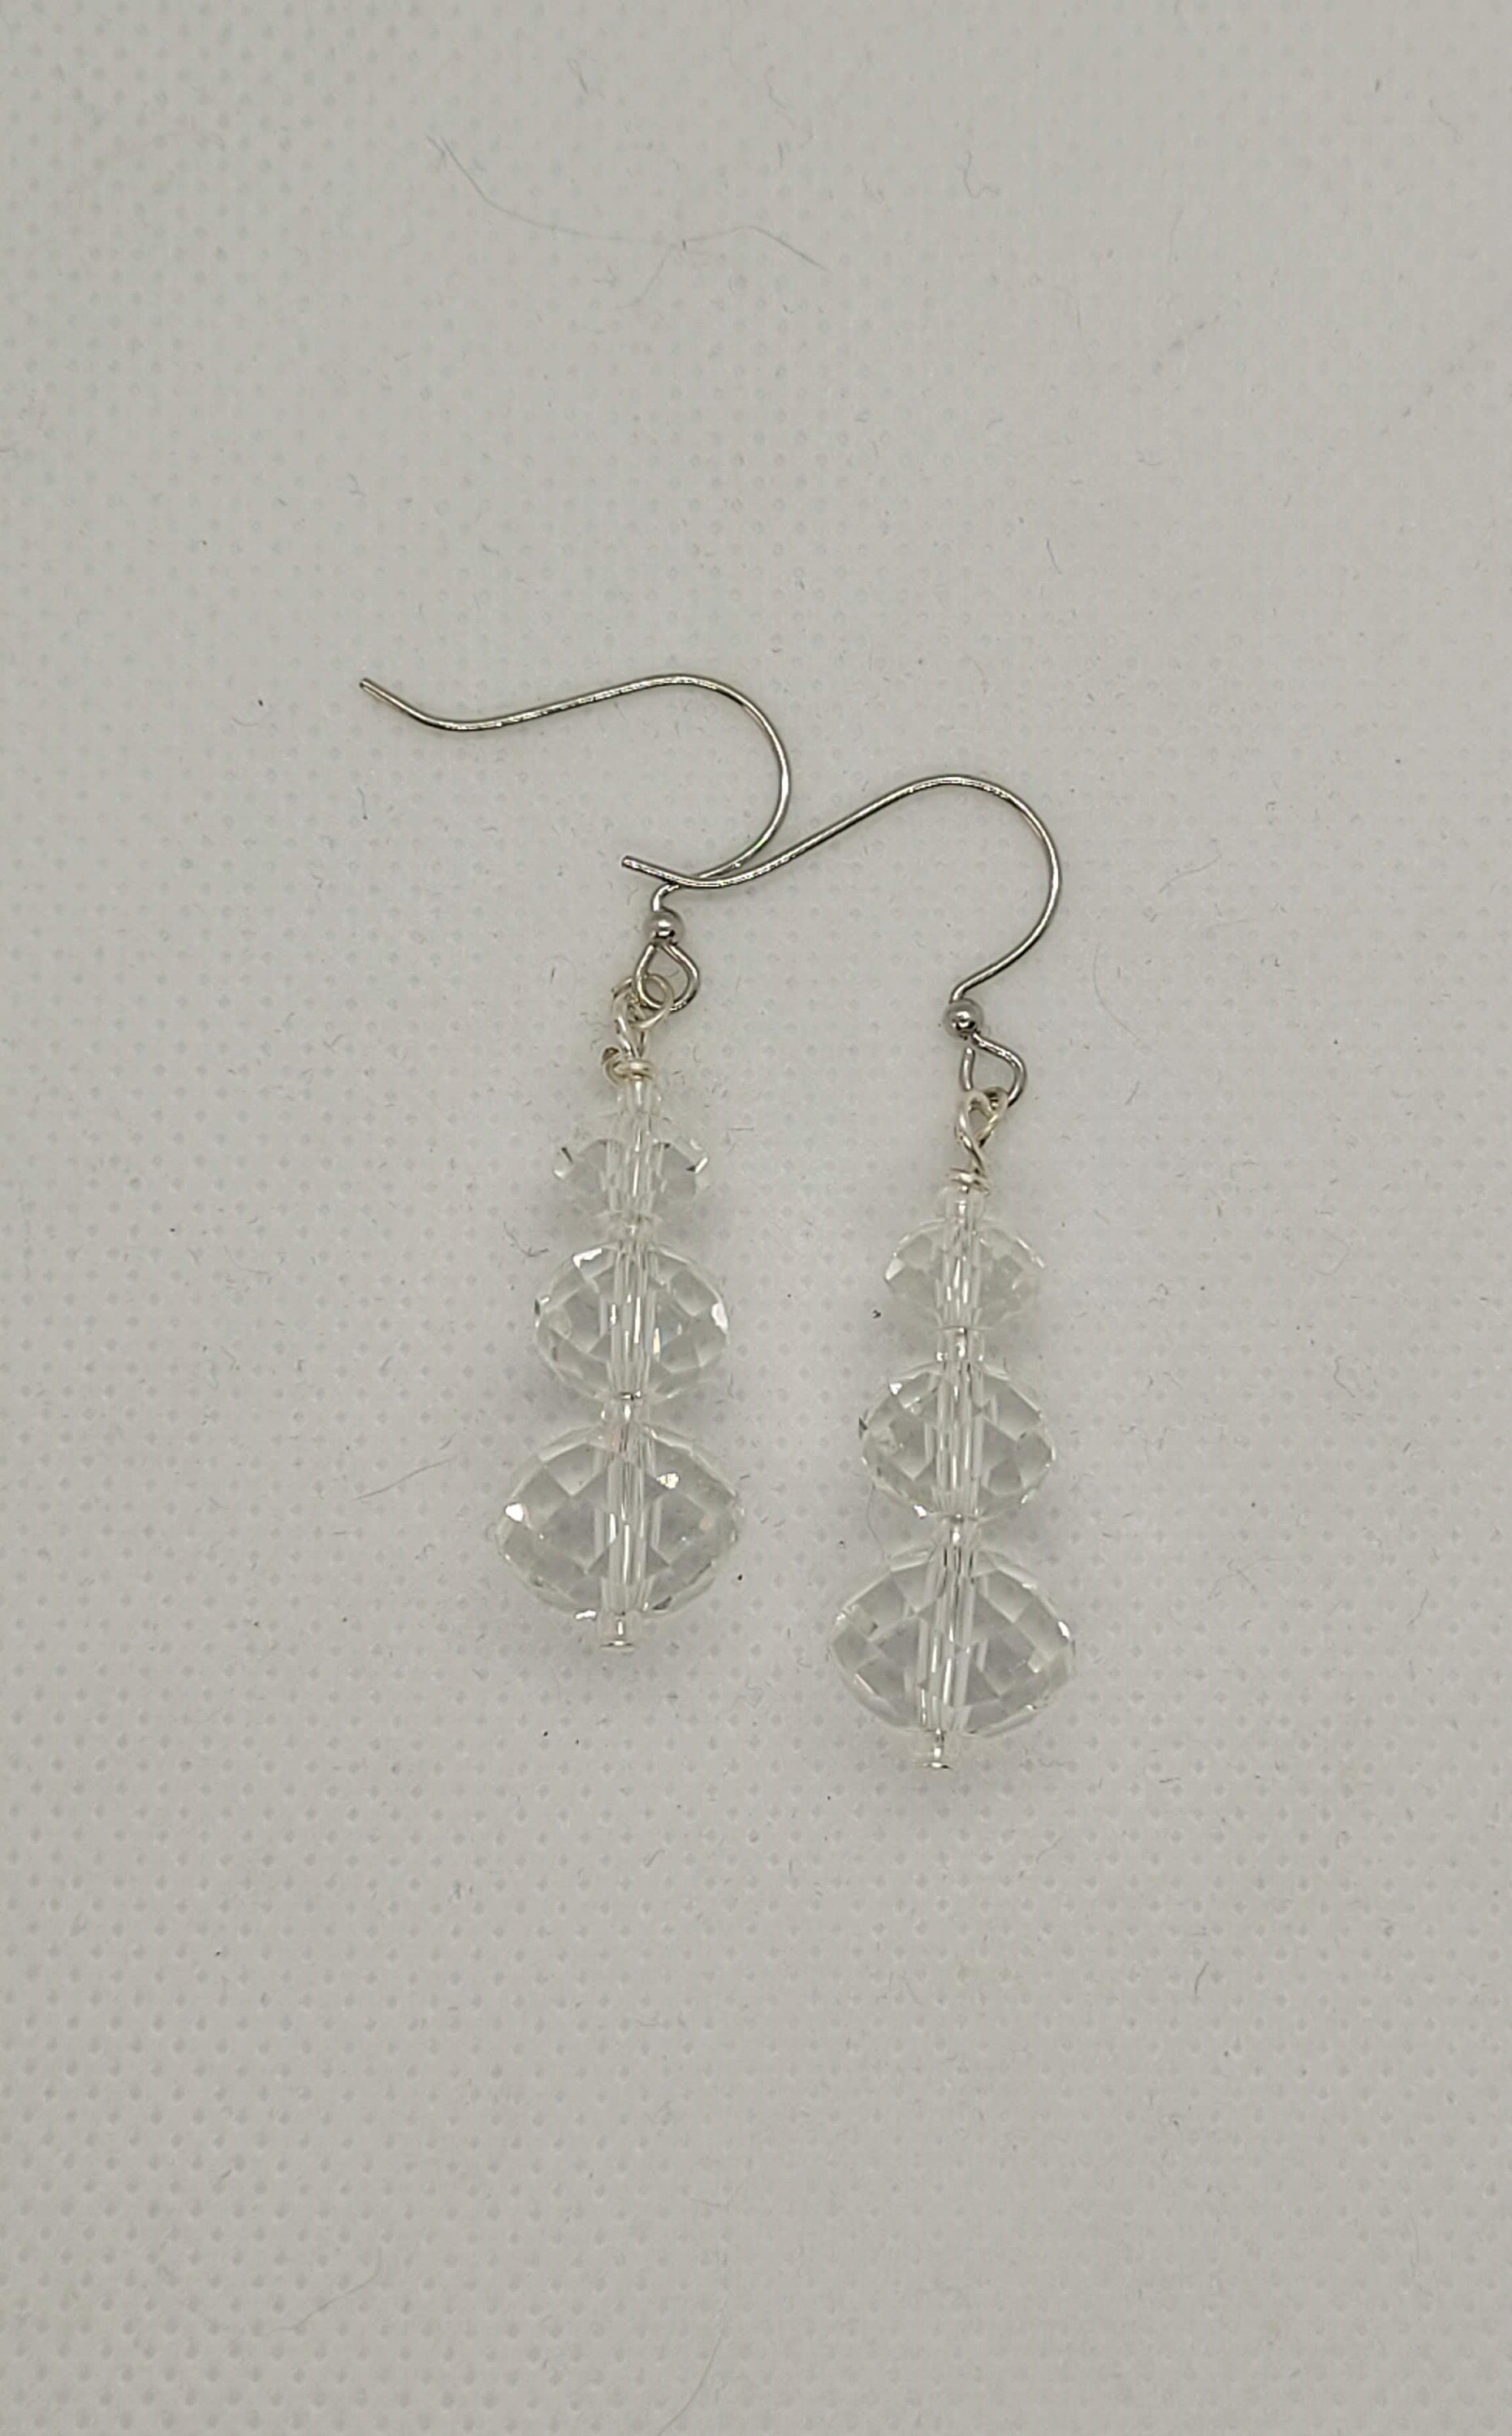 1 Pair of Crystal Glass Bead Earrings Very Pretty Sparkling Beads